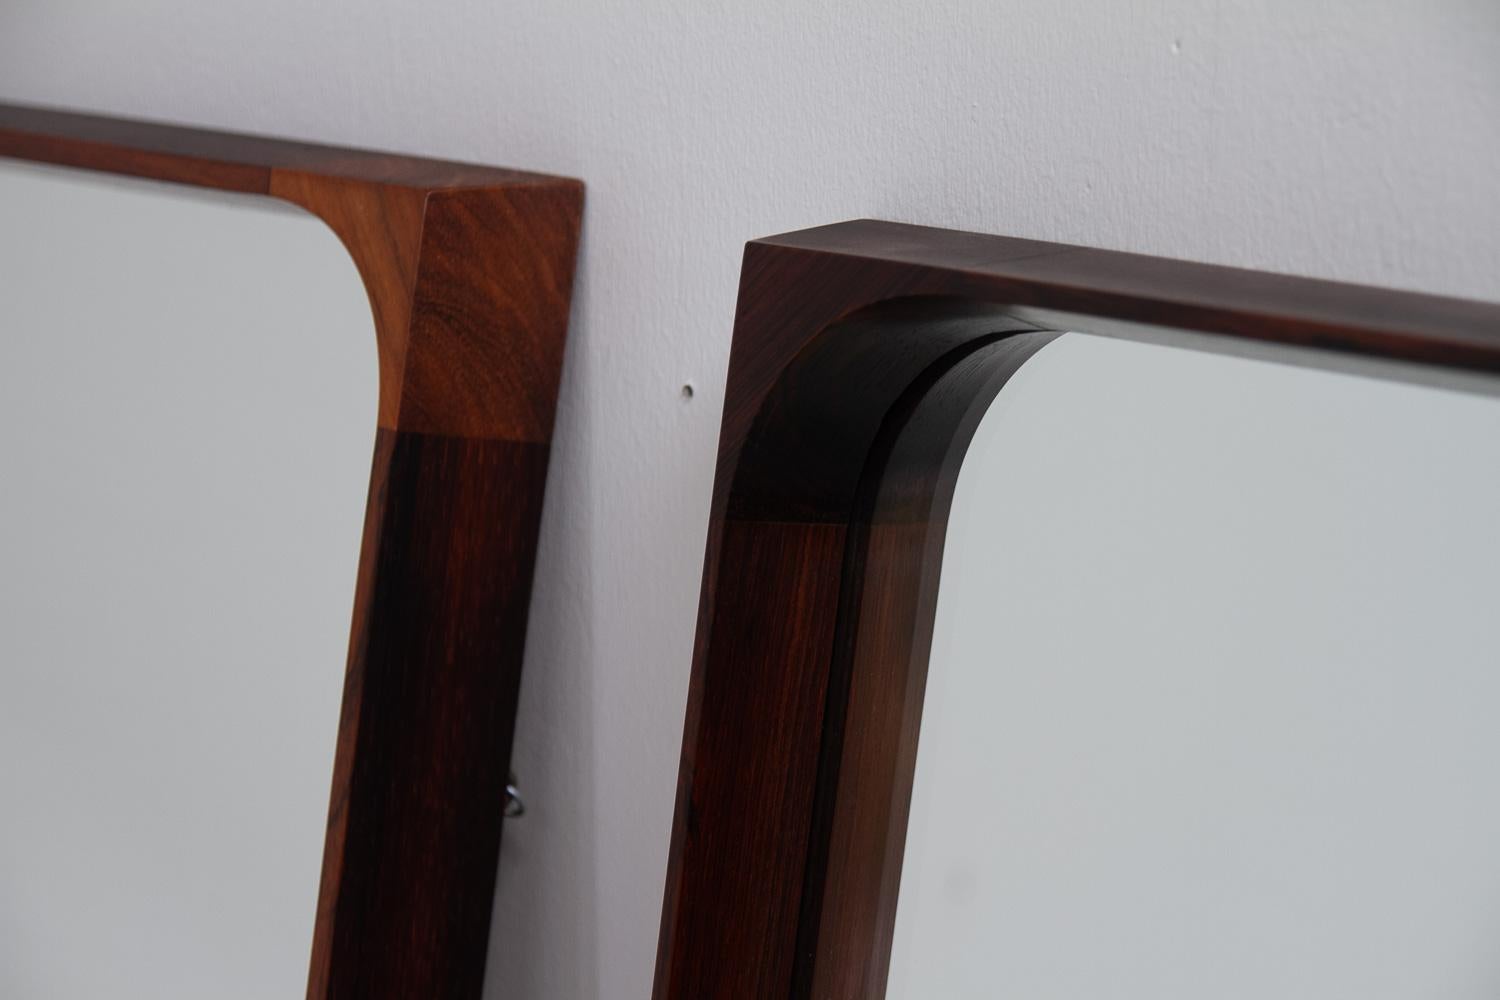 Danish Modern Rosewood Mirrors by Niels Clausen for NC Møbler, 1960s. Set of 2. In Good Condition For Sale In Asaa, DK